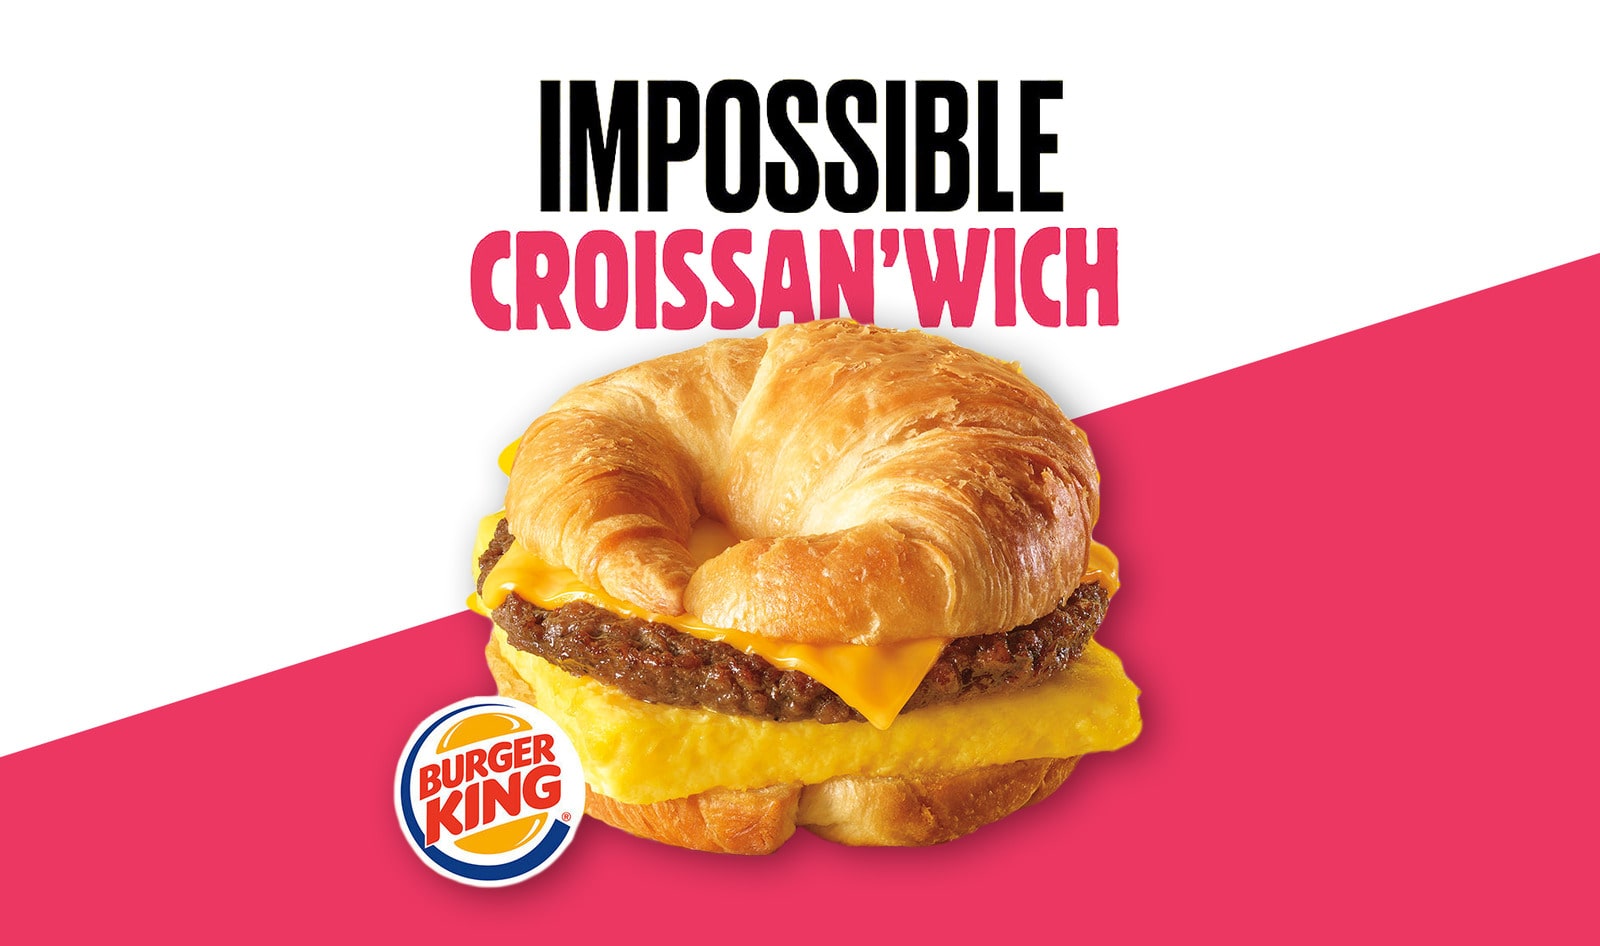 Burger King to Test Meatless Impossible Pork “Croissan’wich” at 139 Locations